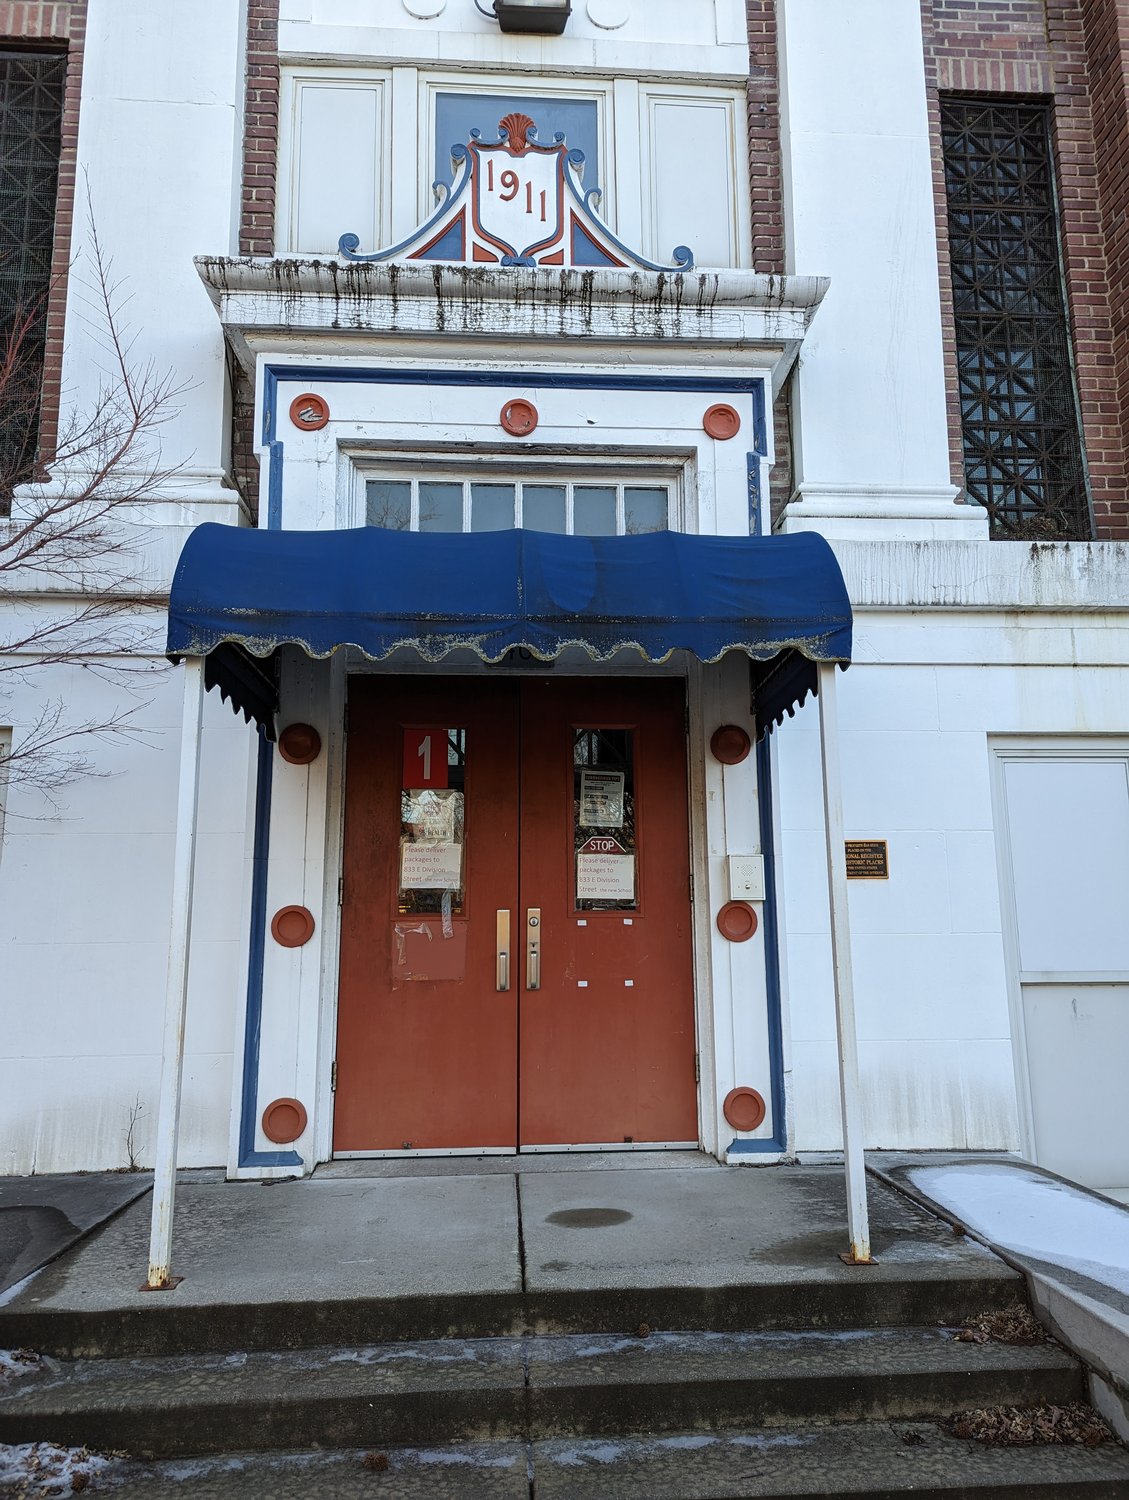 The front door of the historic Boyd Elementary still bears paper signage as a reminder of the bustle of activity that once took place there. The building is marked 1911 on the cartouche above the door. 